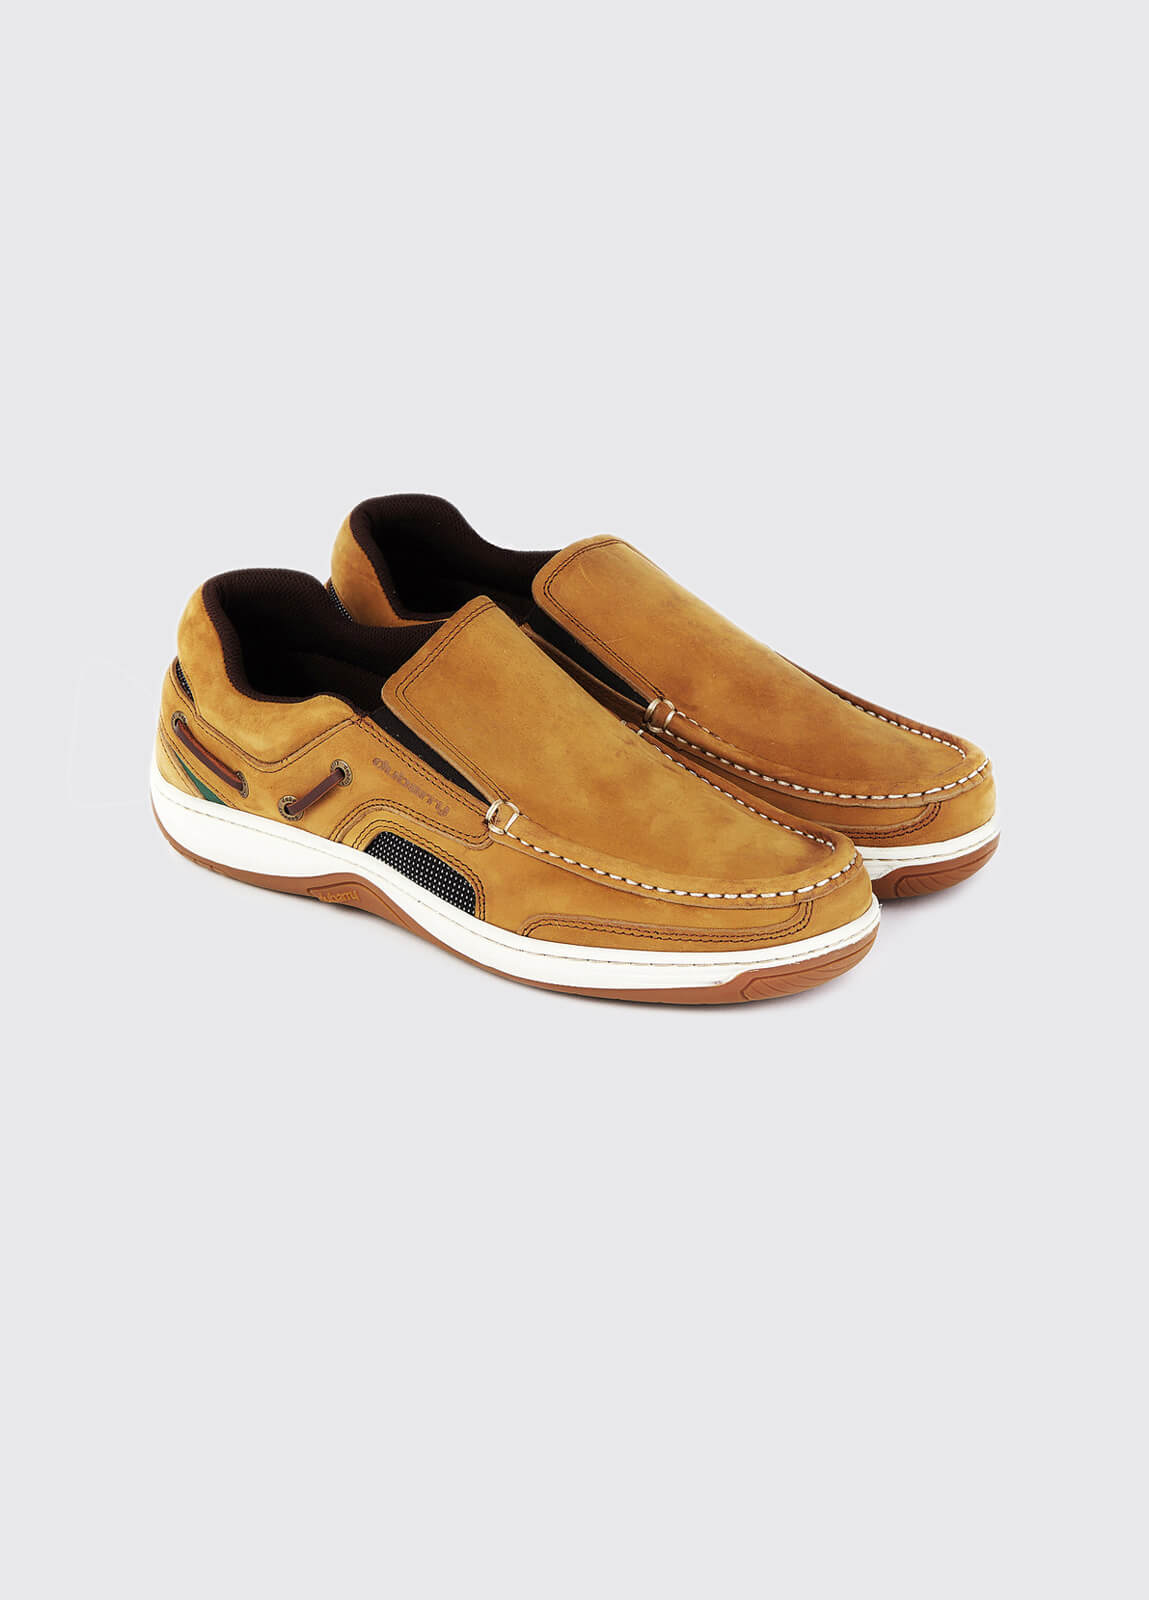 Yacht Loafer - Brown